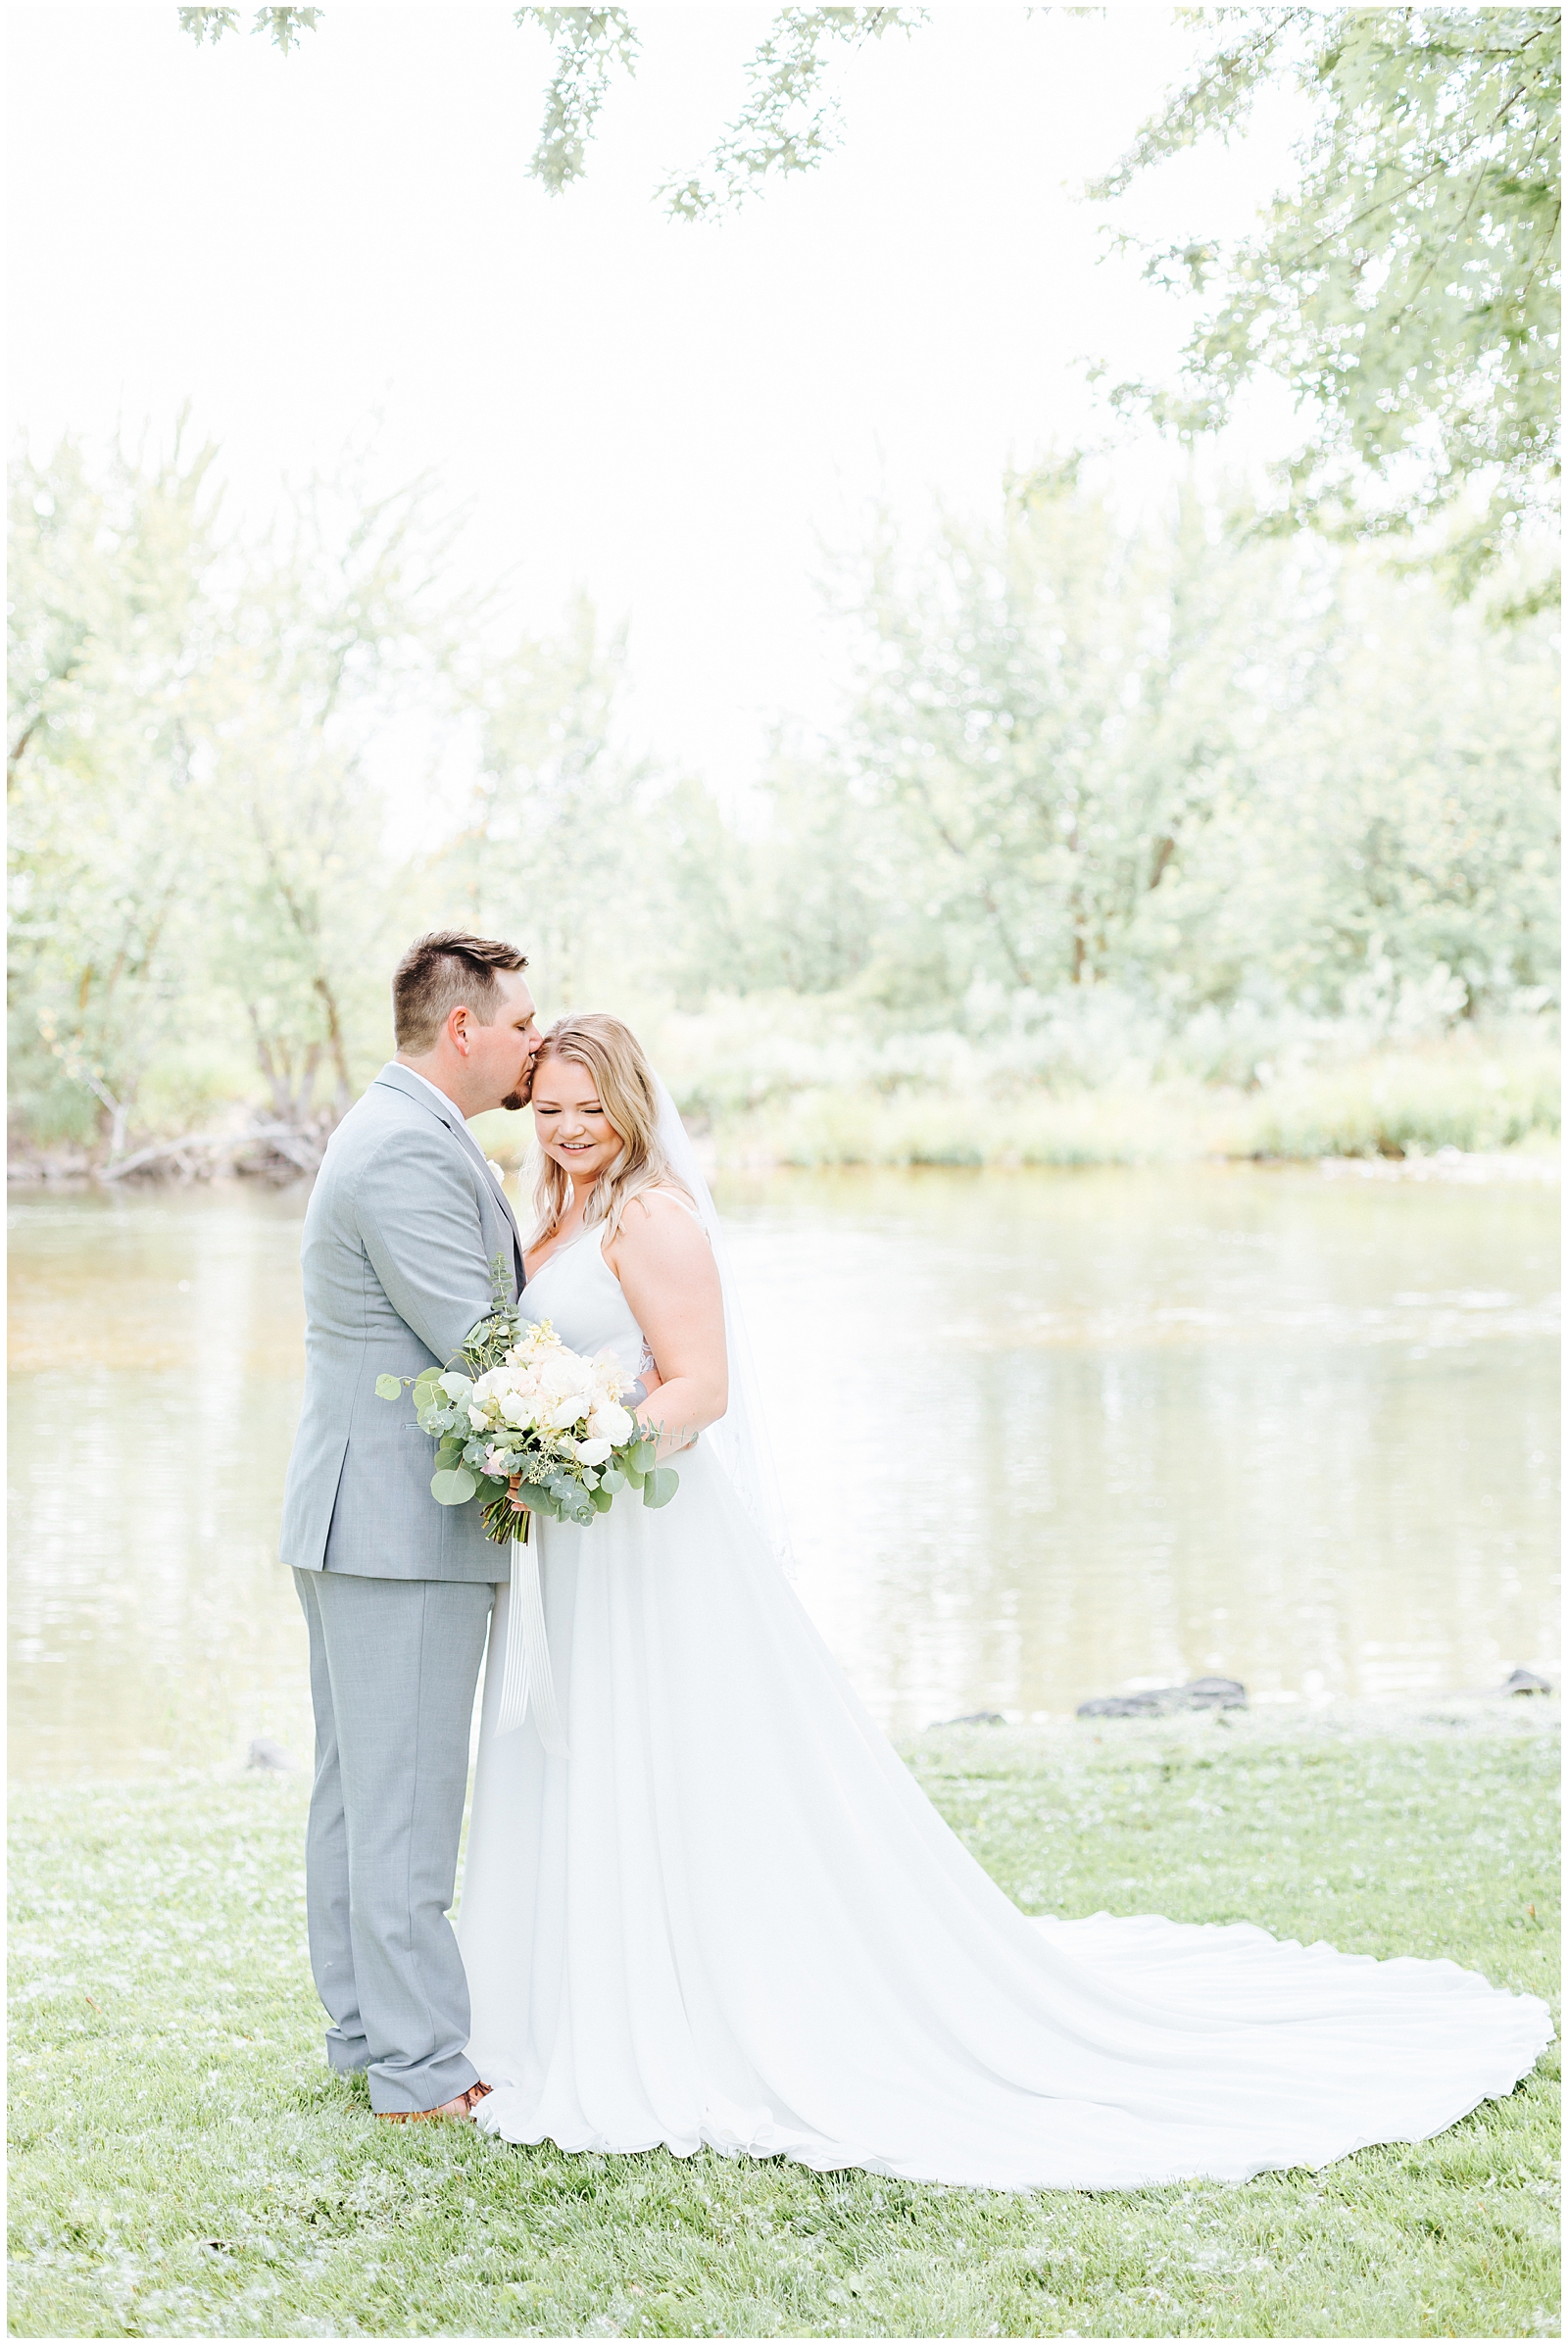 The Bride and Groom at Beautiful White Willow Estate Wedding along the Boise River